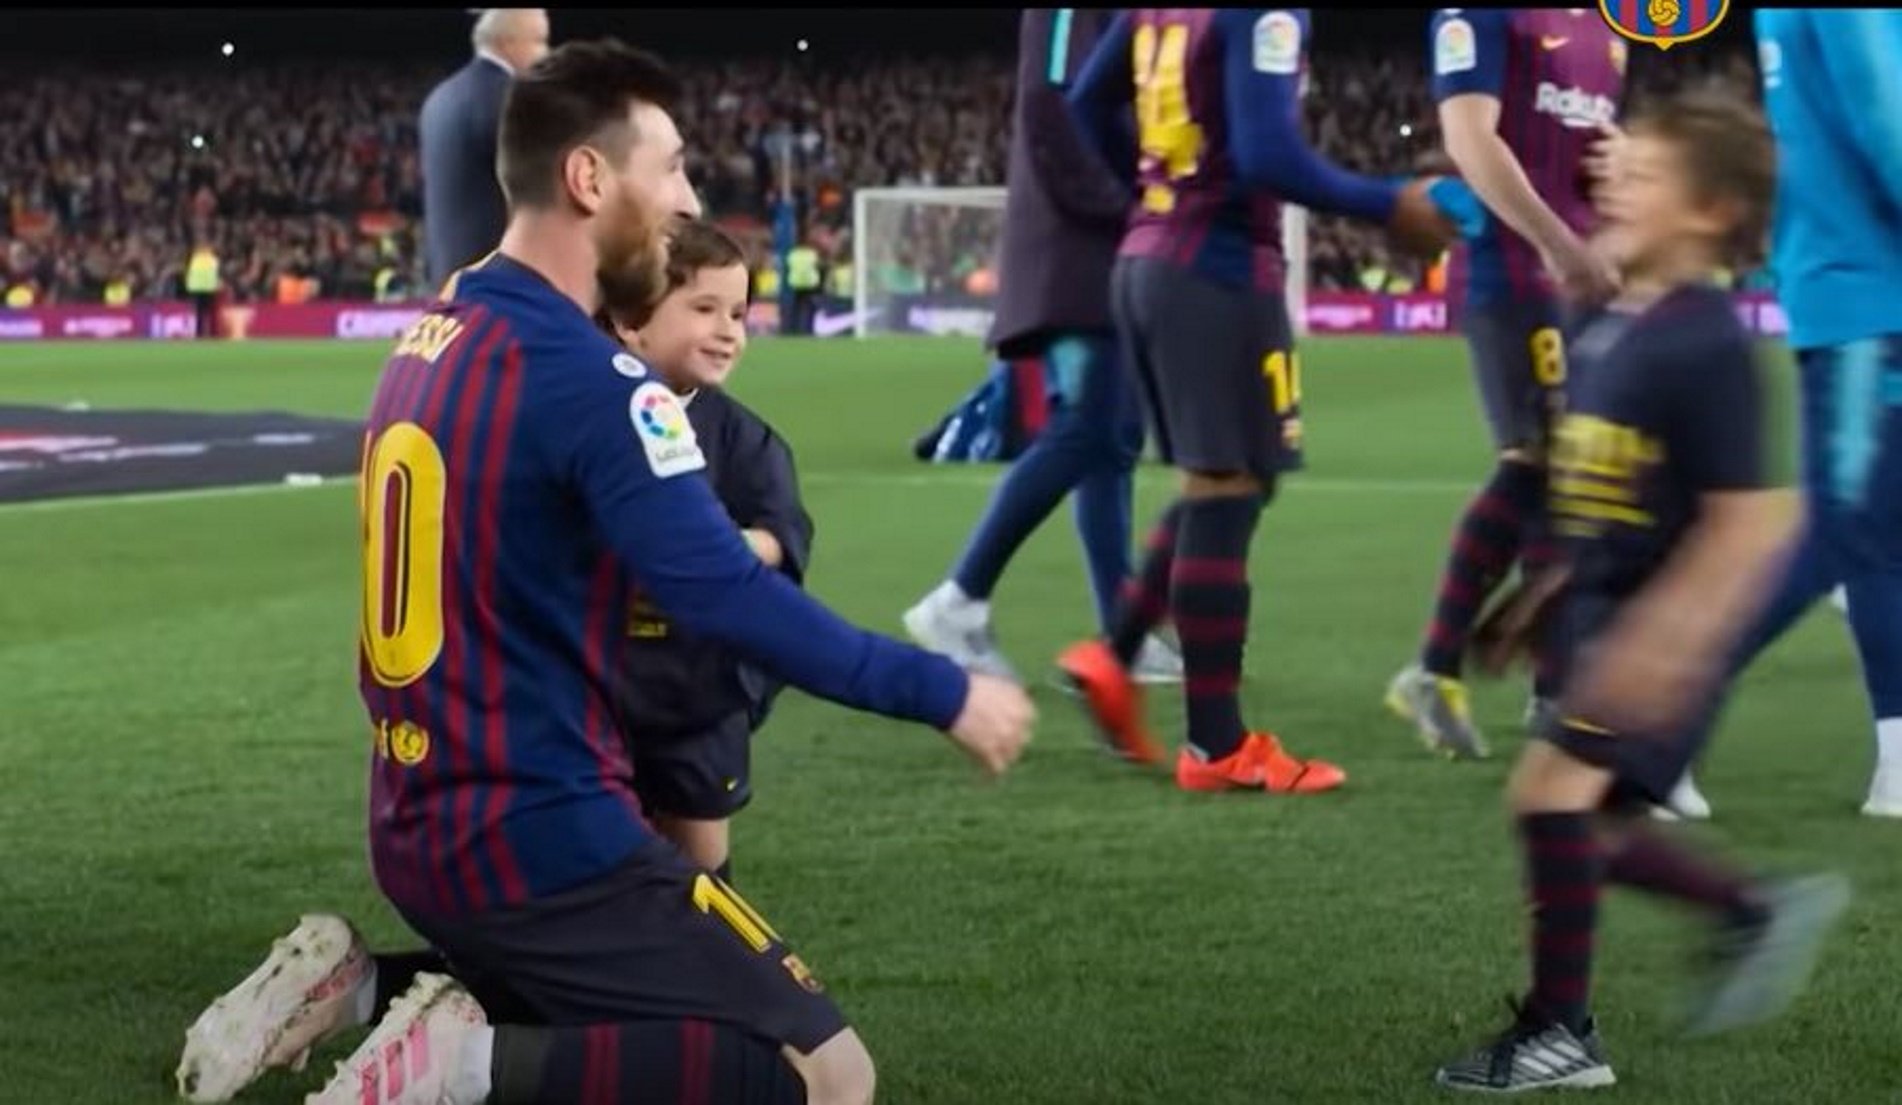 VIDEO | An emotional tribute to Messi from Barça: "Thank you, Leo"